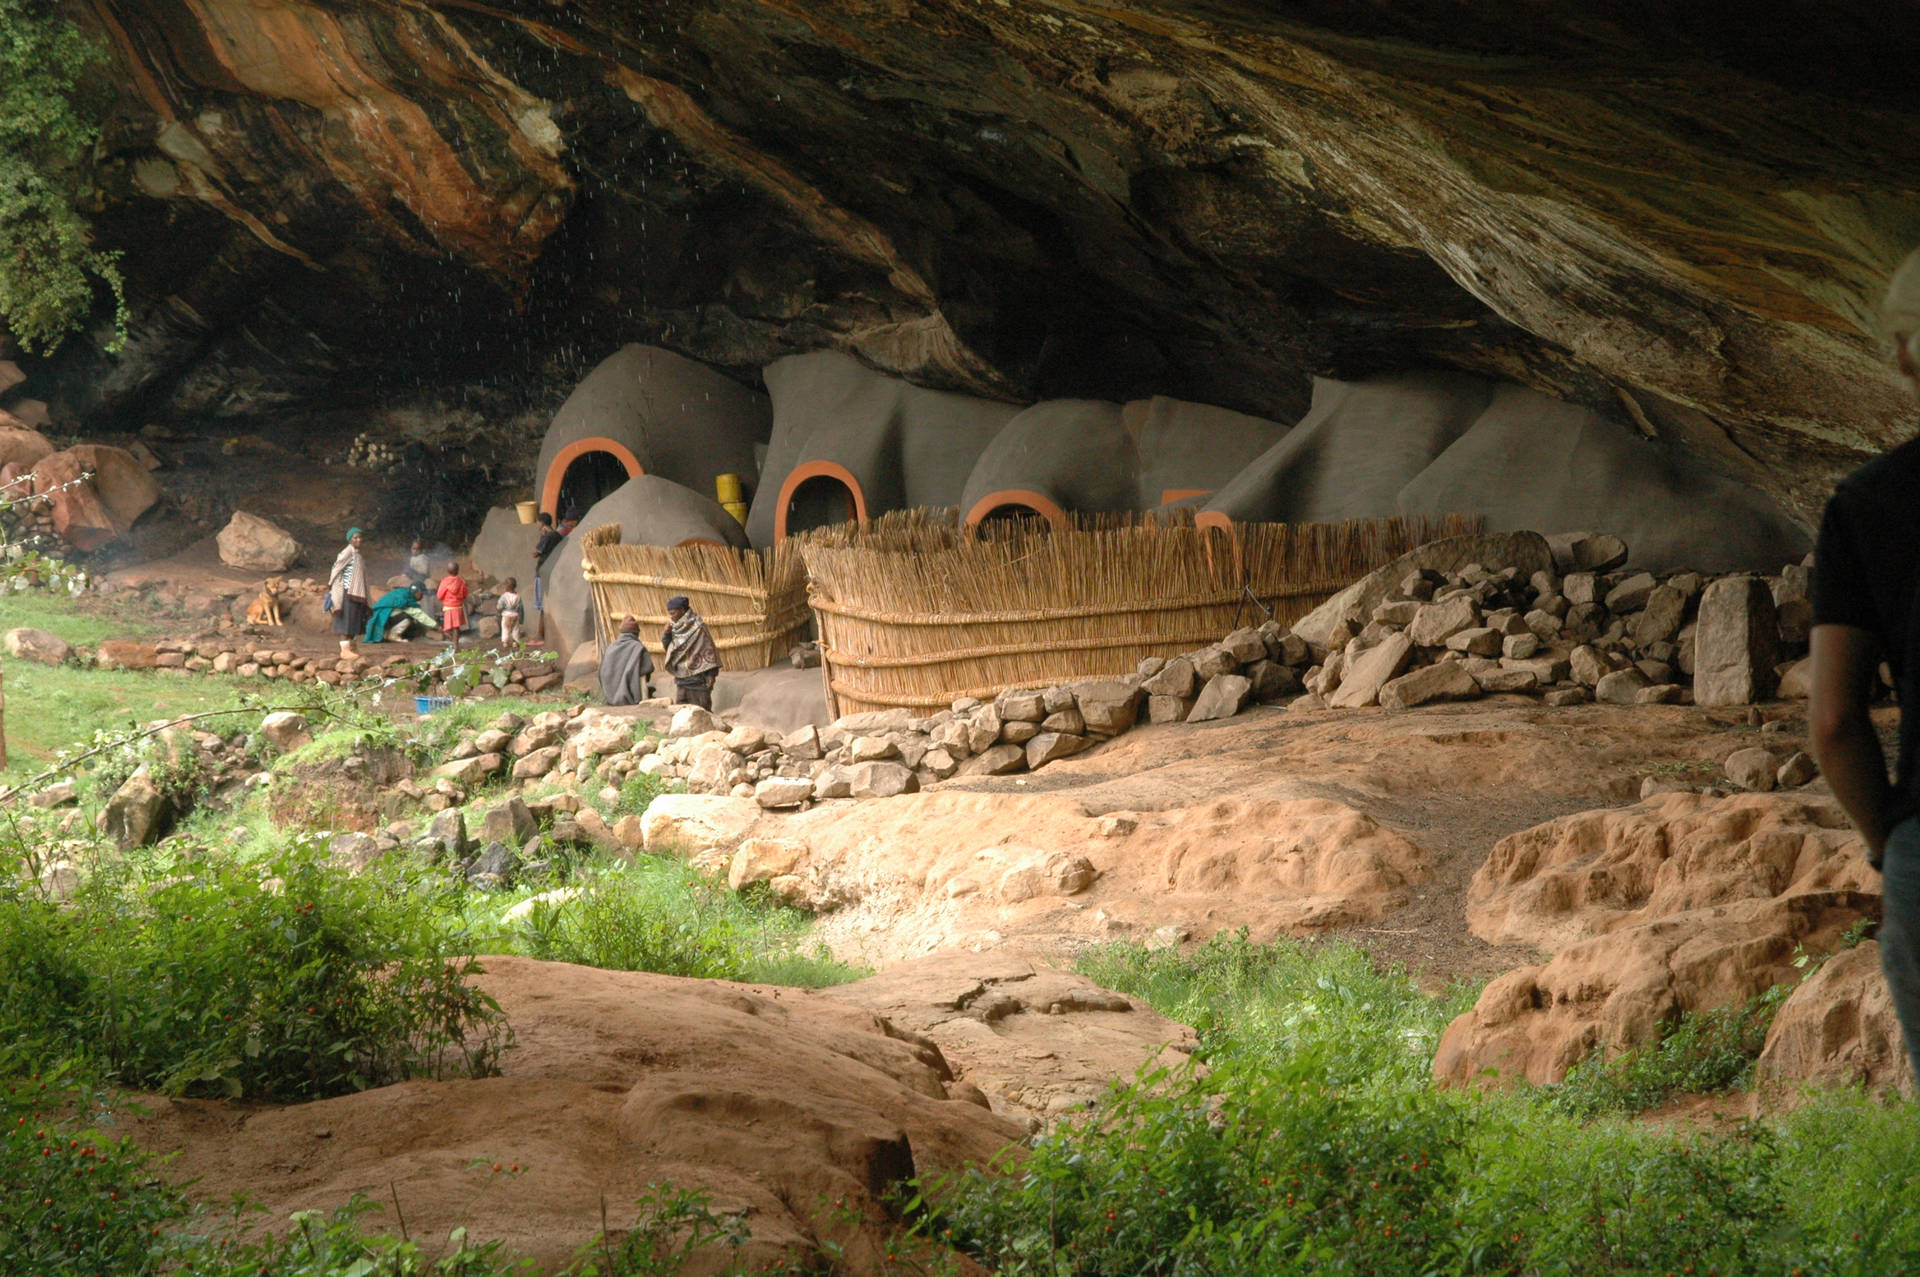 Caption: Majestic View of Kome Caves in Lesotho Wallpaper